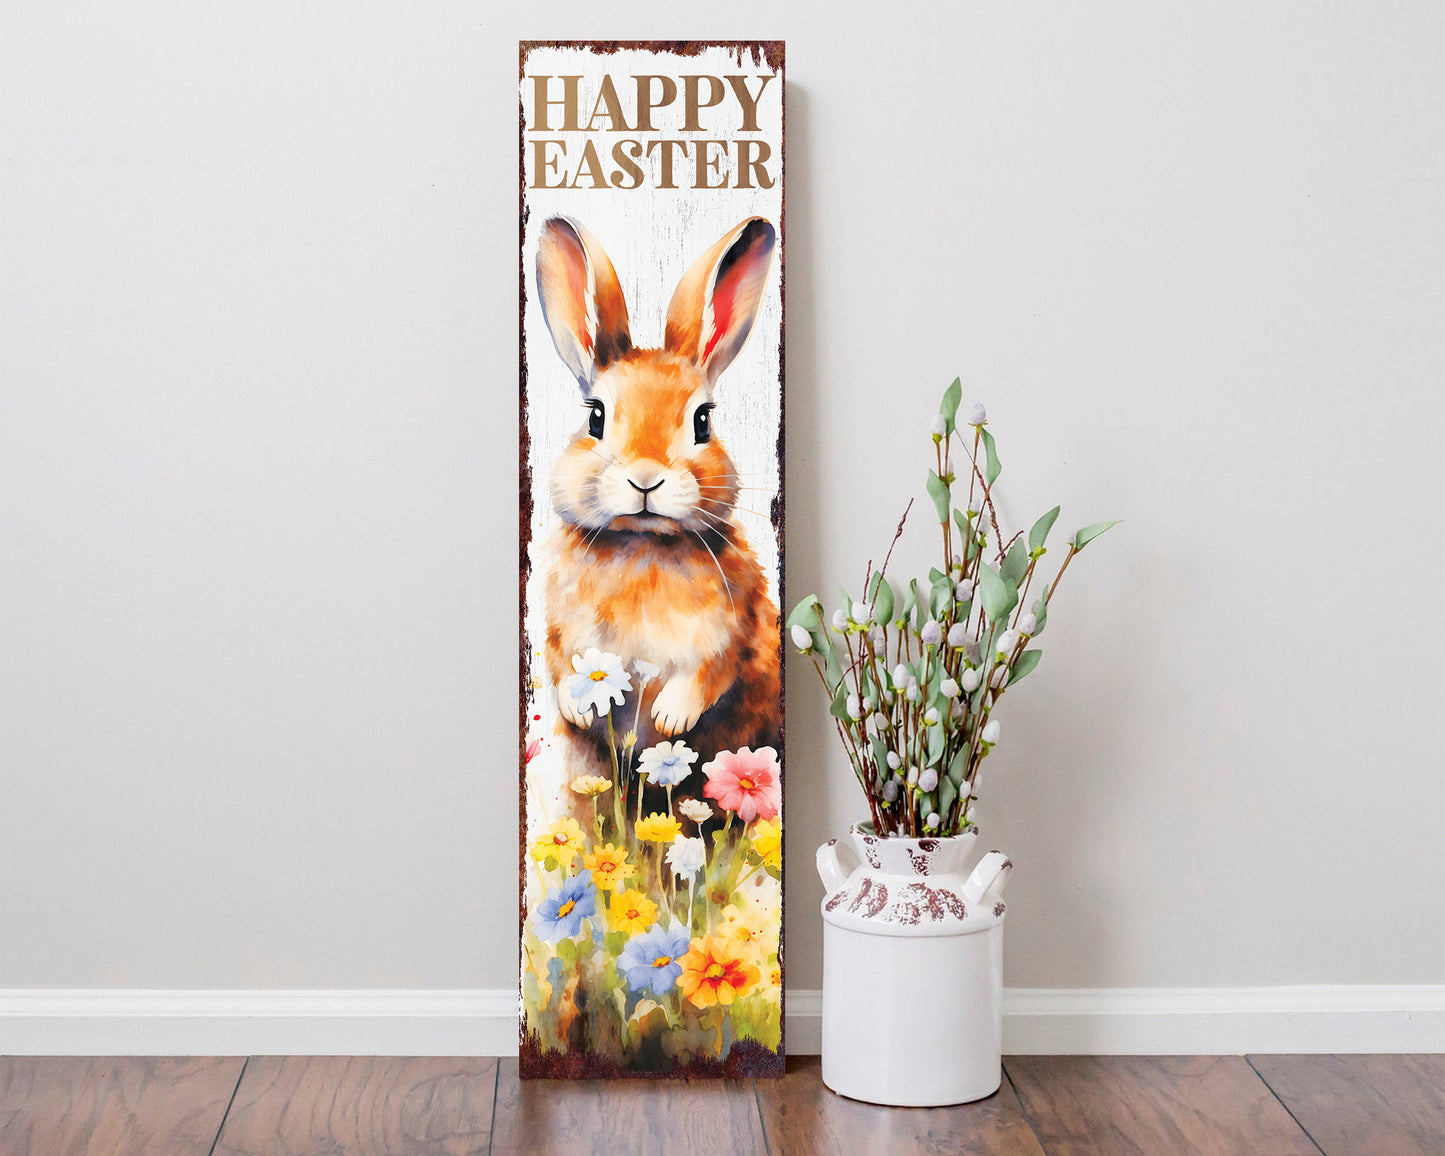 36in Rustic Farmhouse 'Happy Easter' Sign for Front Porch Sign| Easter Outdoor Decor for Front Door